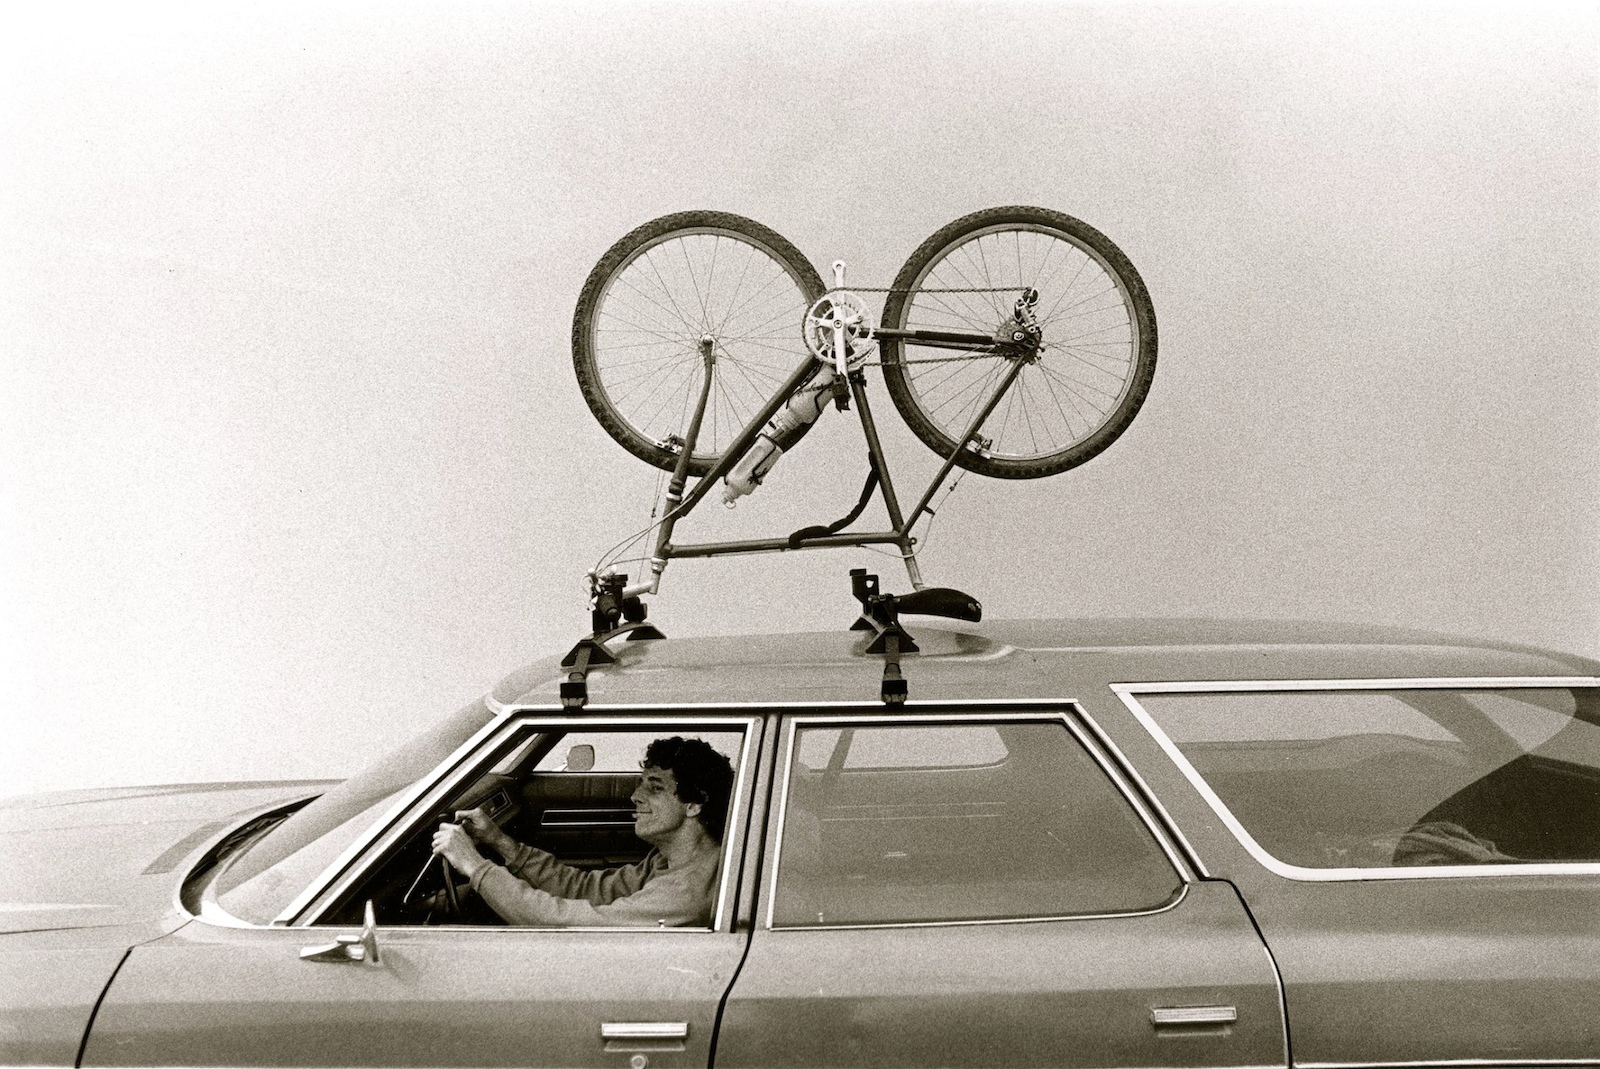 Dean Bradley produced the first issue of Mountain Bike Action magazine. This was one of his images published in the pages. Ranchita Verde was the Mantis delivery vehicle - A stately Chevrolet Impala wagon that got 10 MPG on a good day.